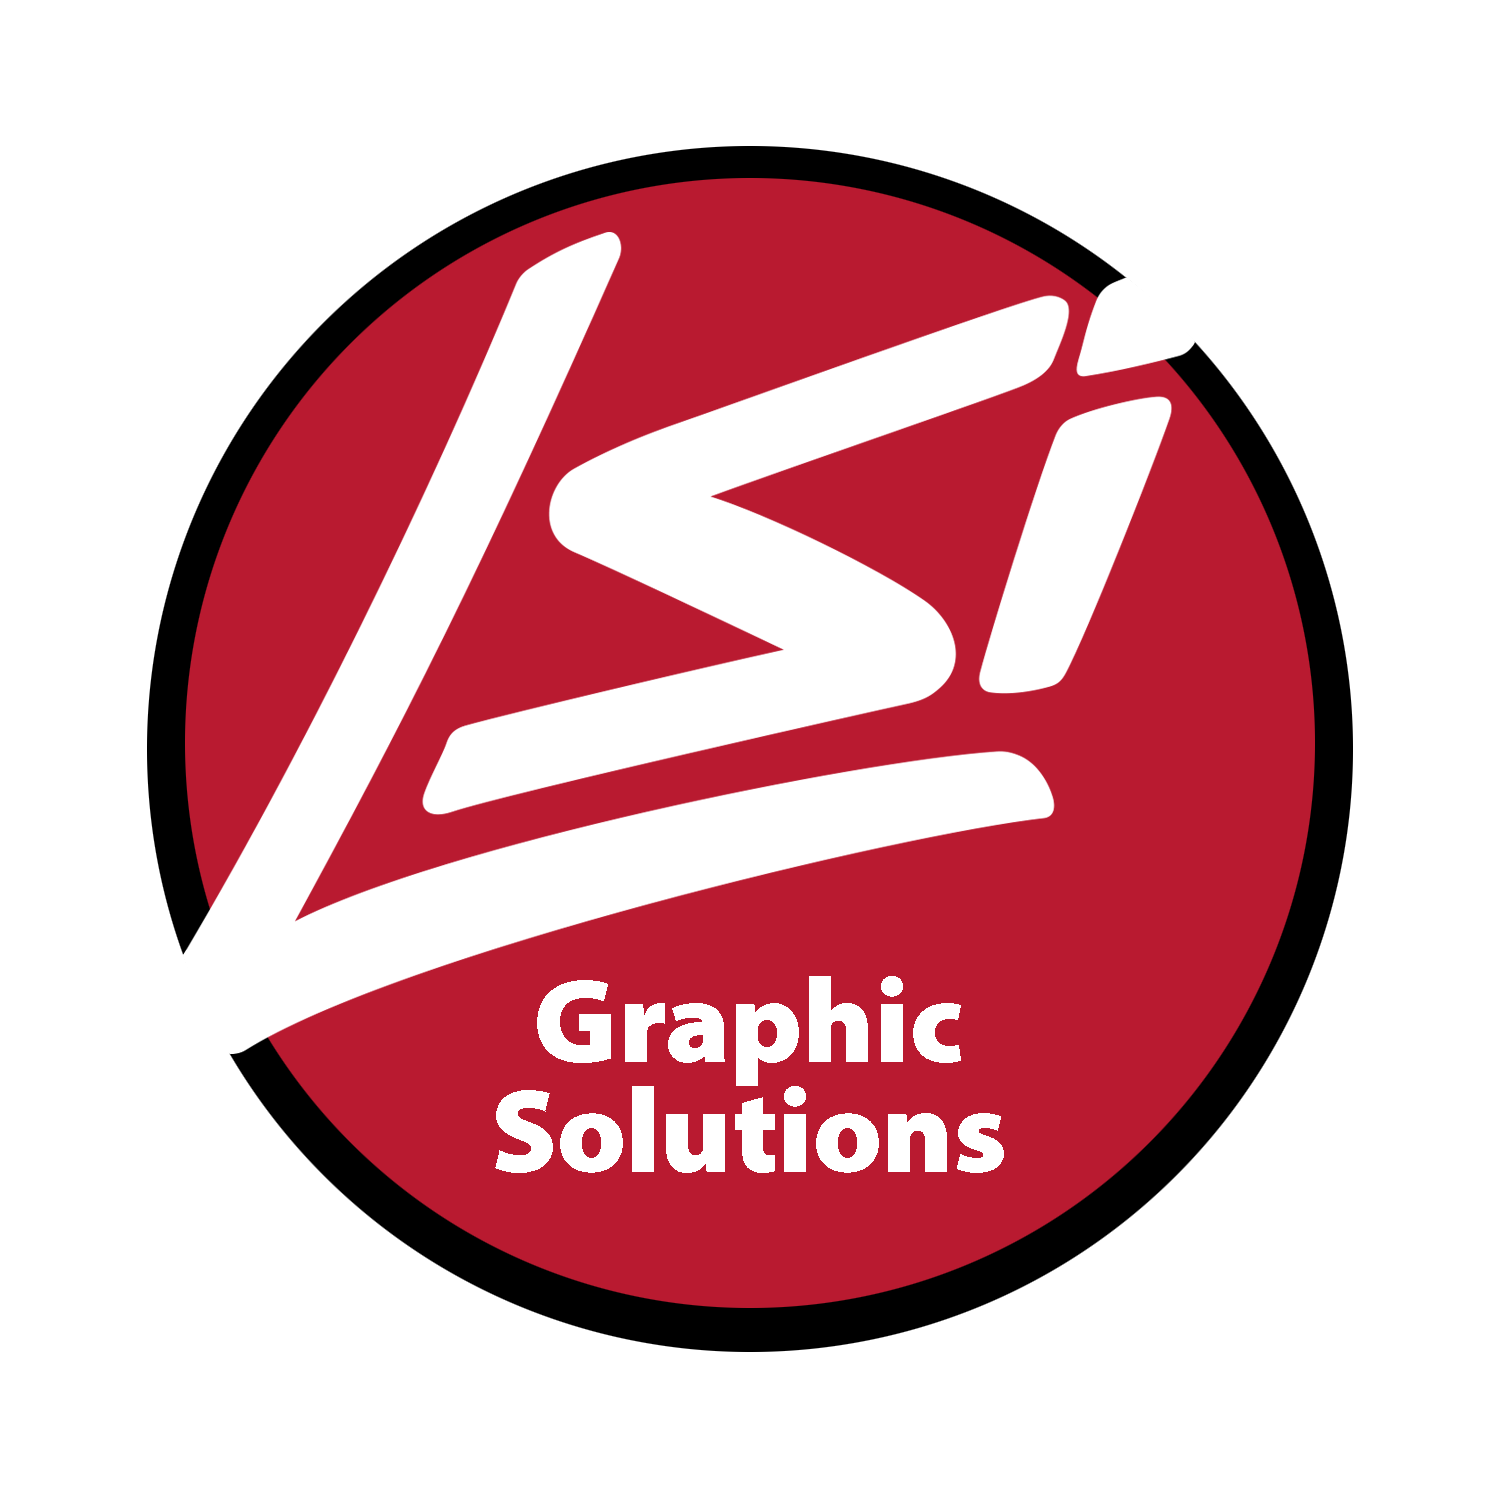 LSI Graphic Solutions Announces Appointment of New National Sales Manager.